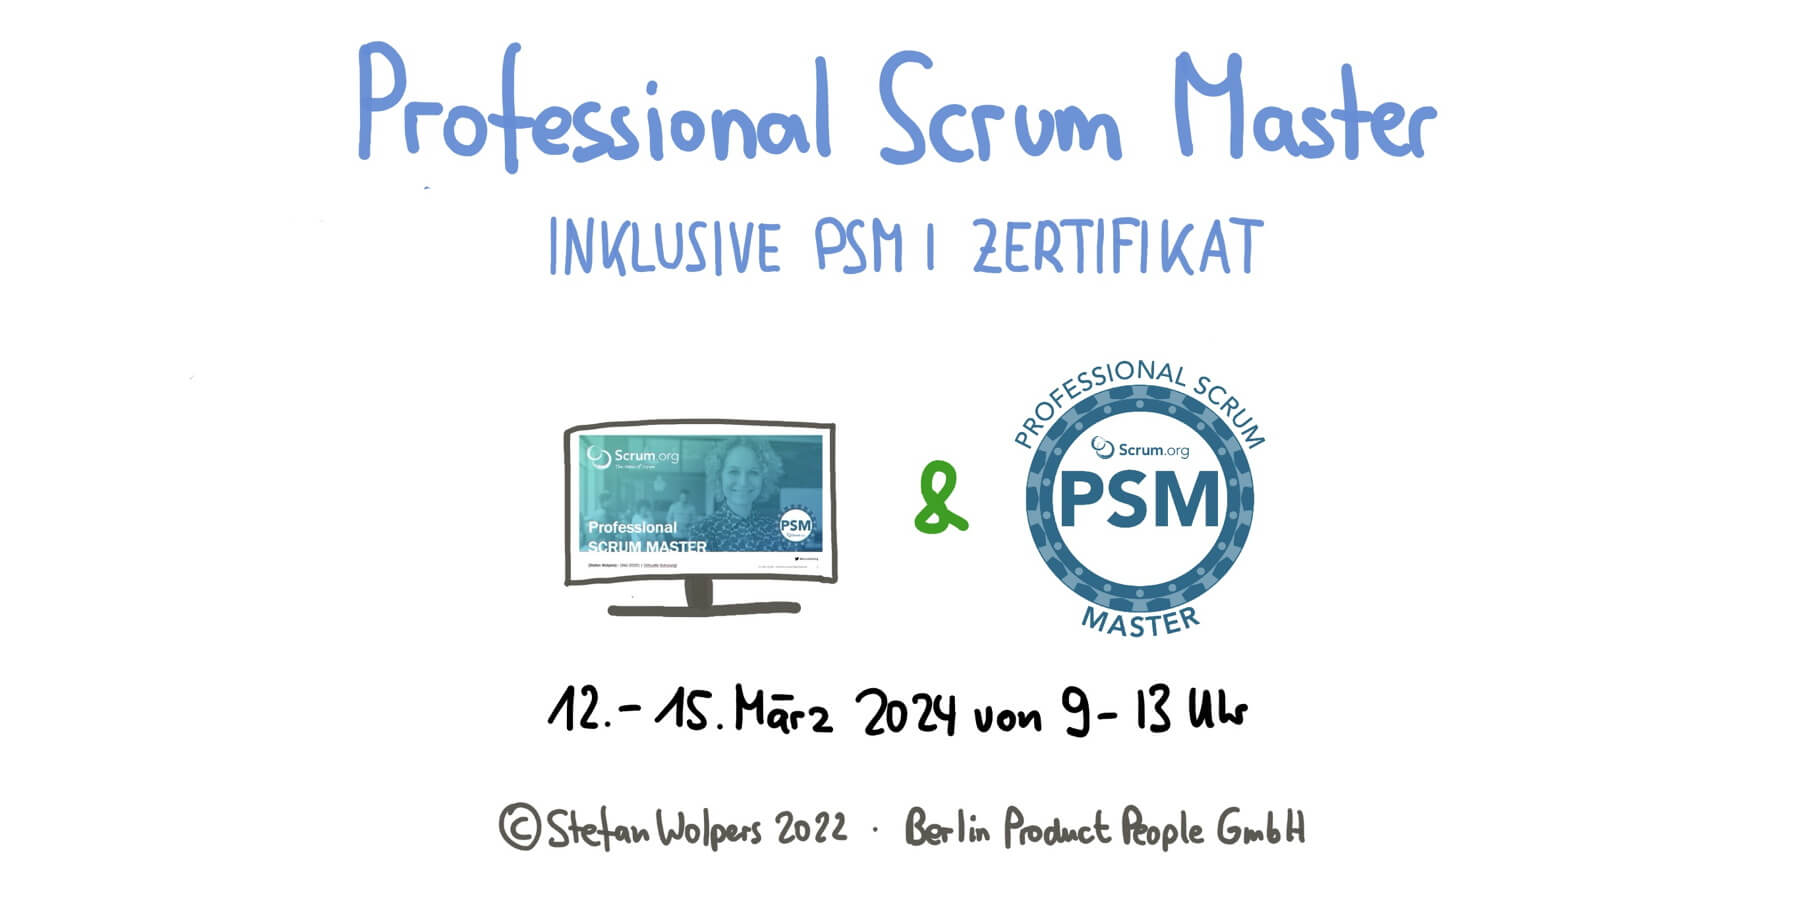 Professional Scrum Master Training w/ PSM I Certificate — Live Virtual Class: March 12-15, 2024 — Berlin-Product-People.com